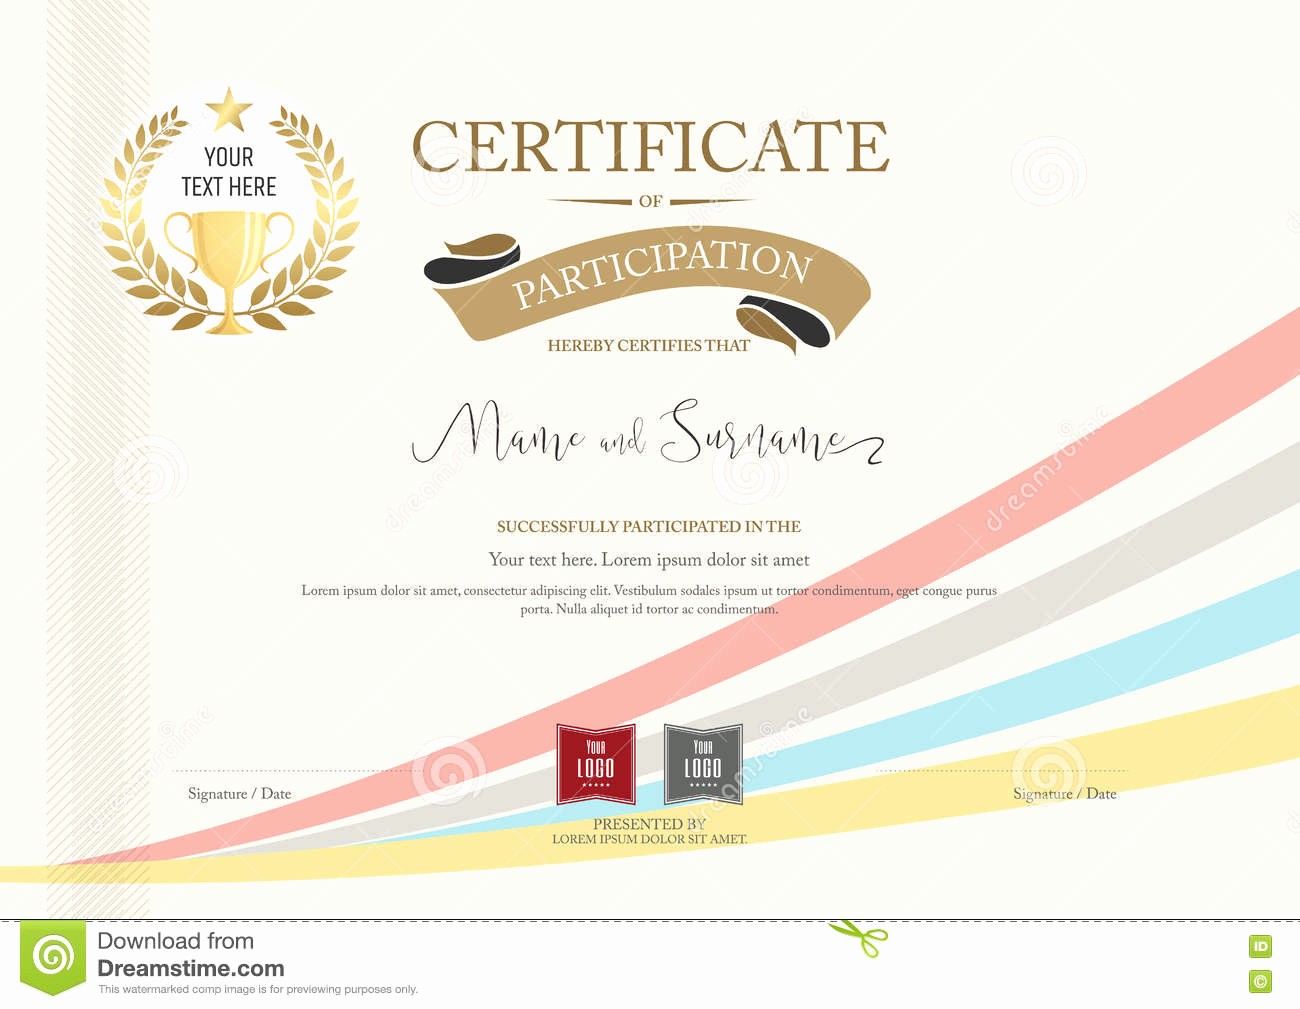 Certificate Of Participation for Kids Beautiful Certificate Participation Template In Gold Color Vector